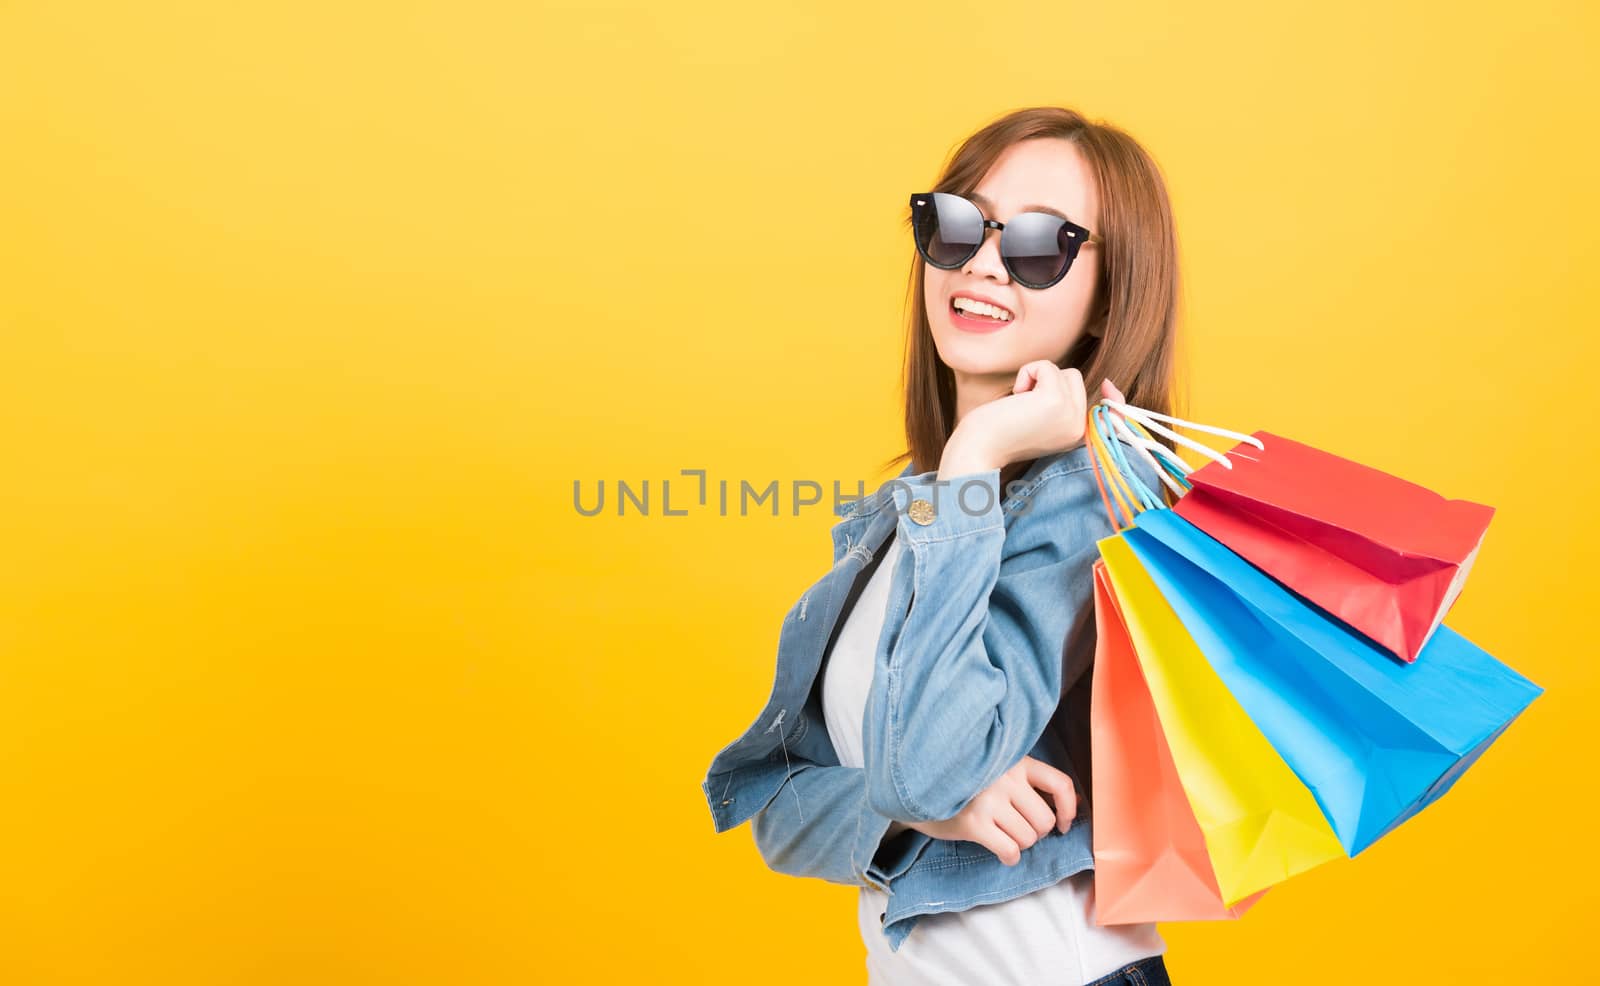 Asian happy portrait beautiful cute young woman teen smiling standing with sunglasses excited holding shopping bags multi color looking up isolated, studio shot yellow background with copy space